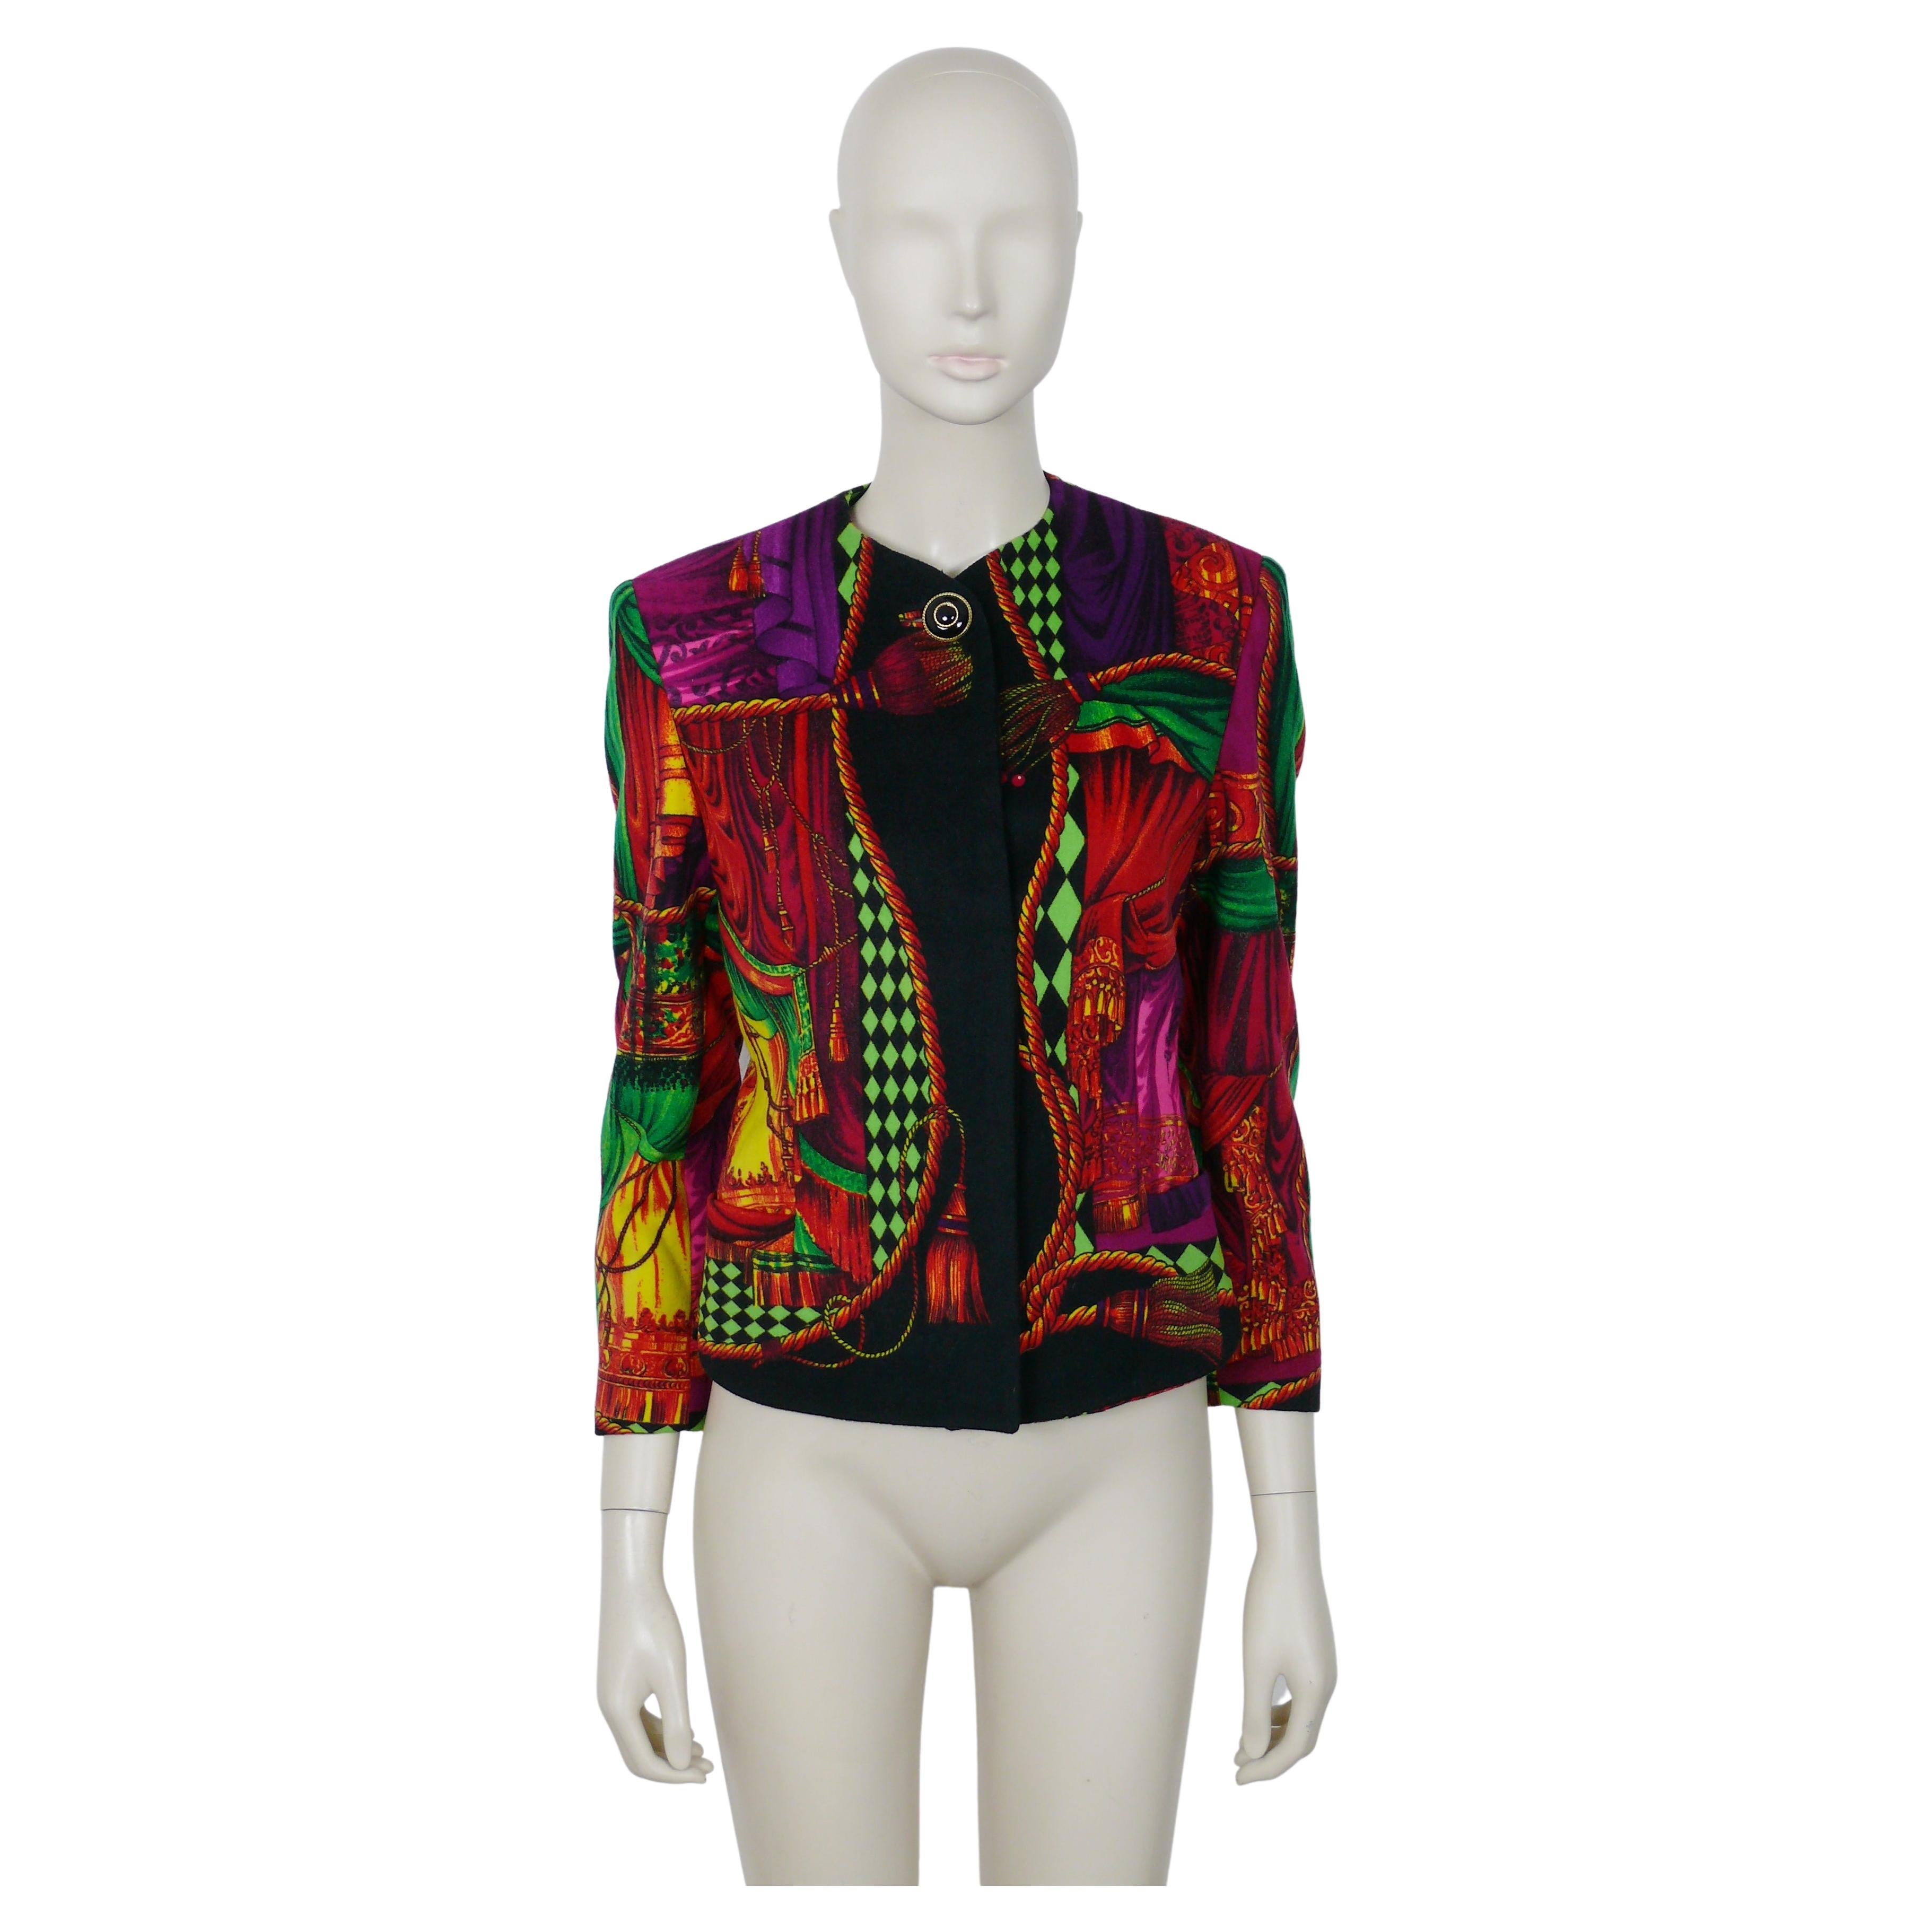 Gianni Versace Couture Iconic Fall/Winter 1991/92 Teather Drape Print Jacket